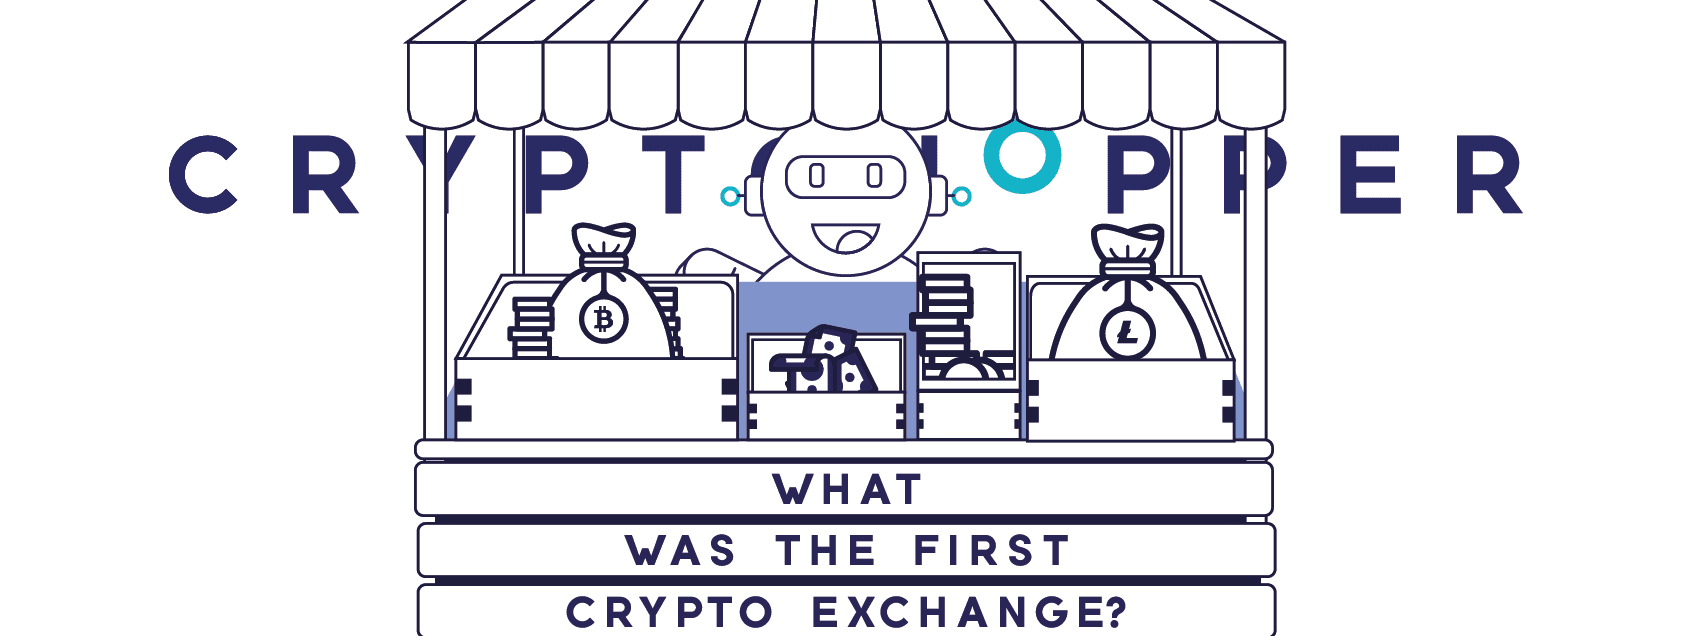 What Was the First Crypto Exchange?